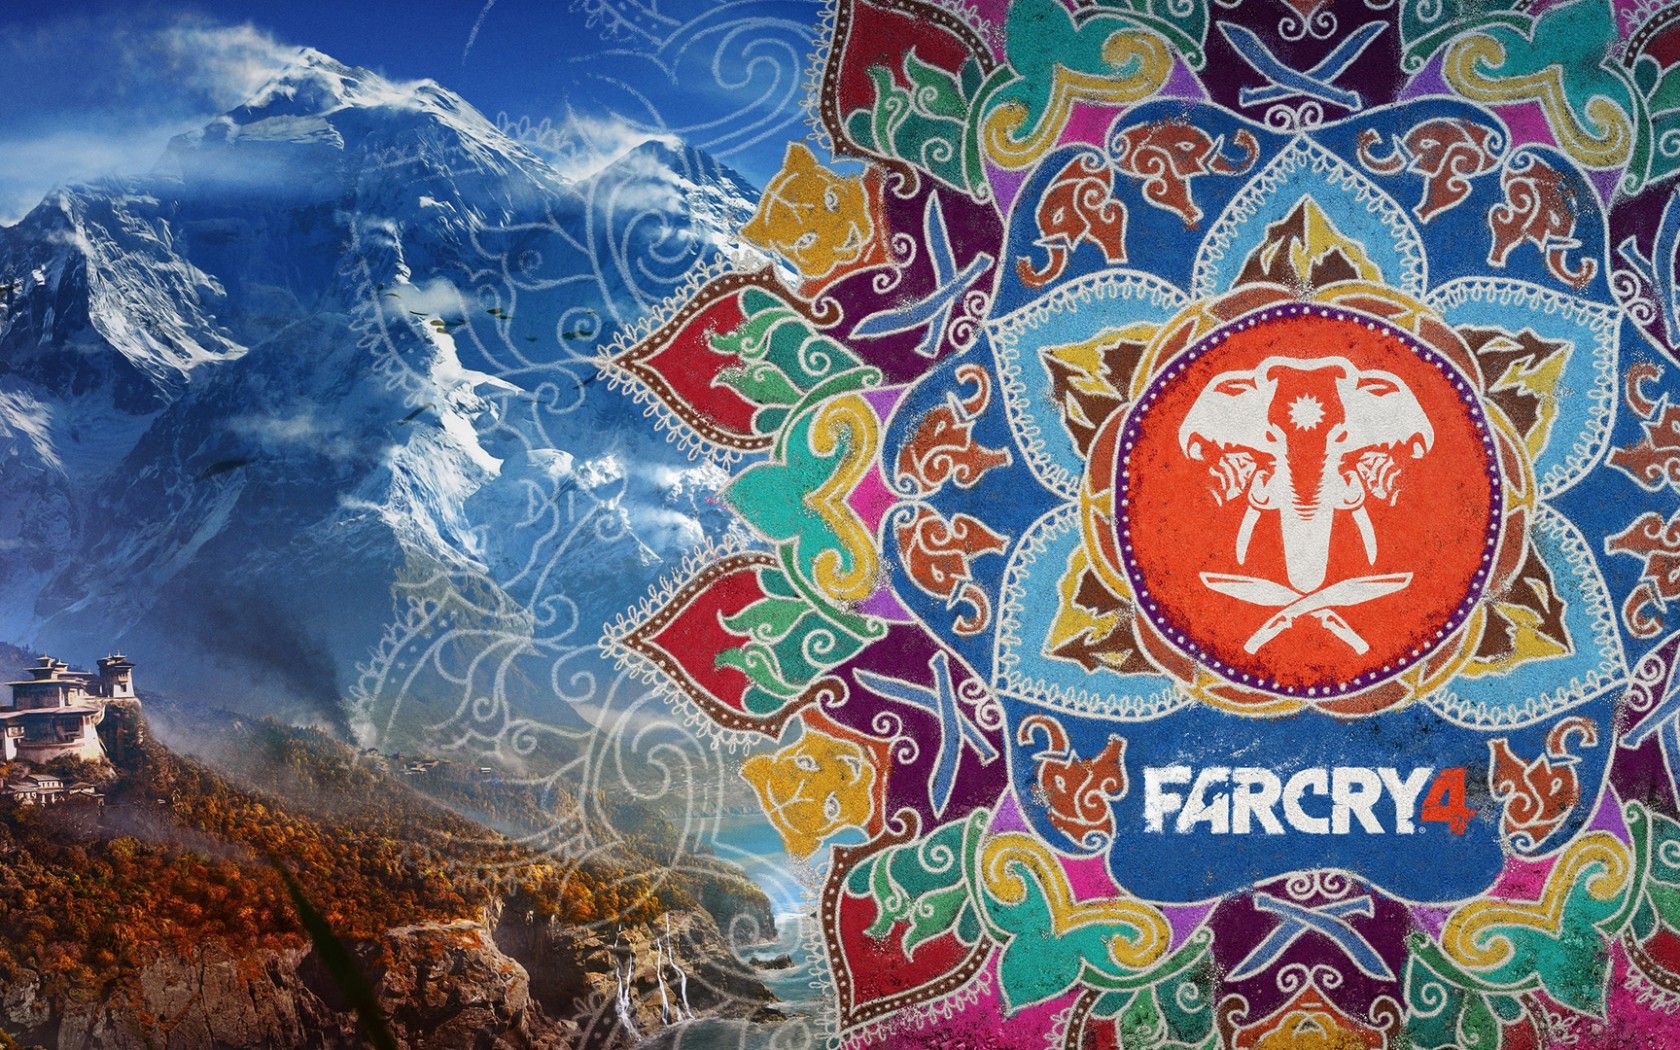 Far Cry 4 Images Wallpapers